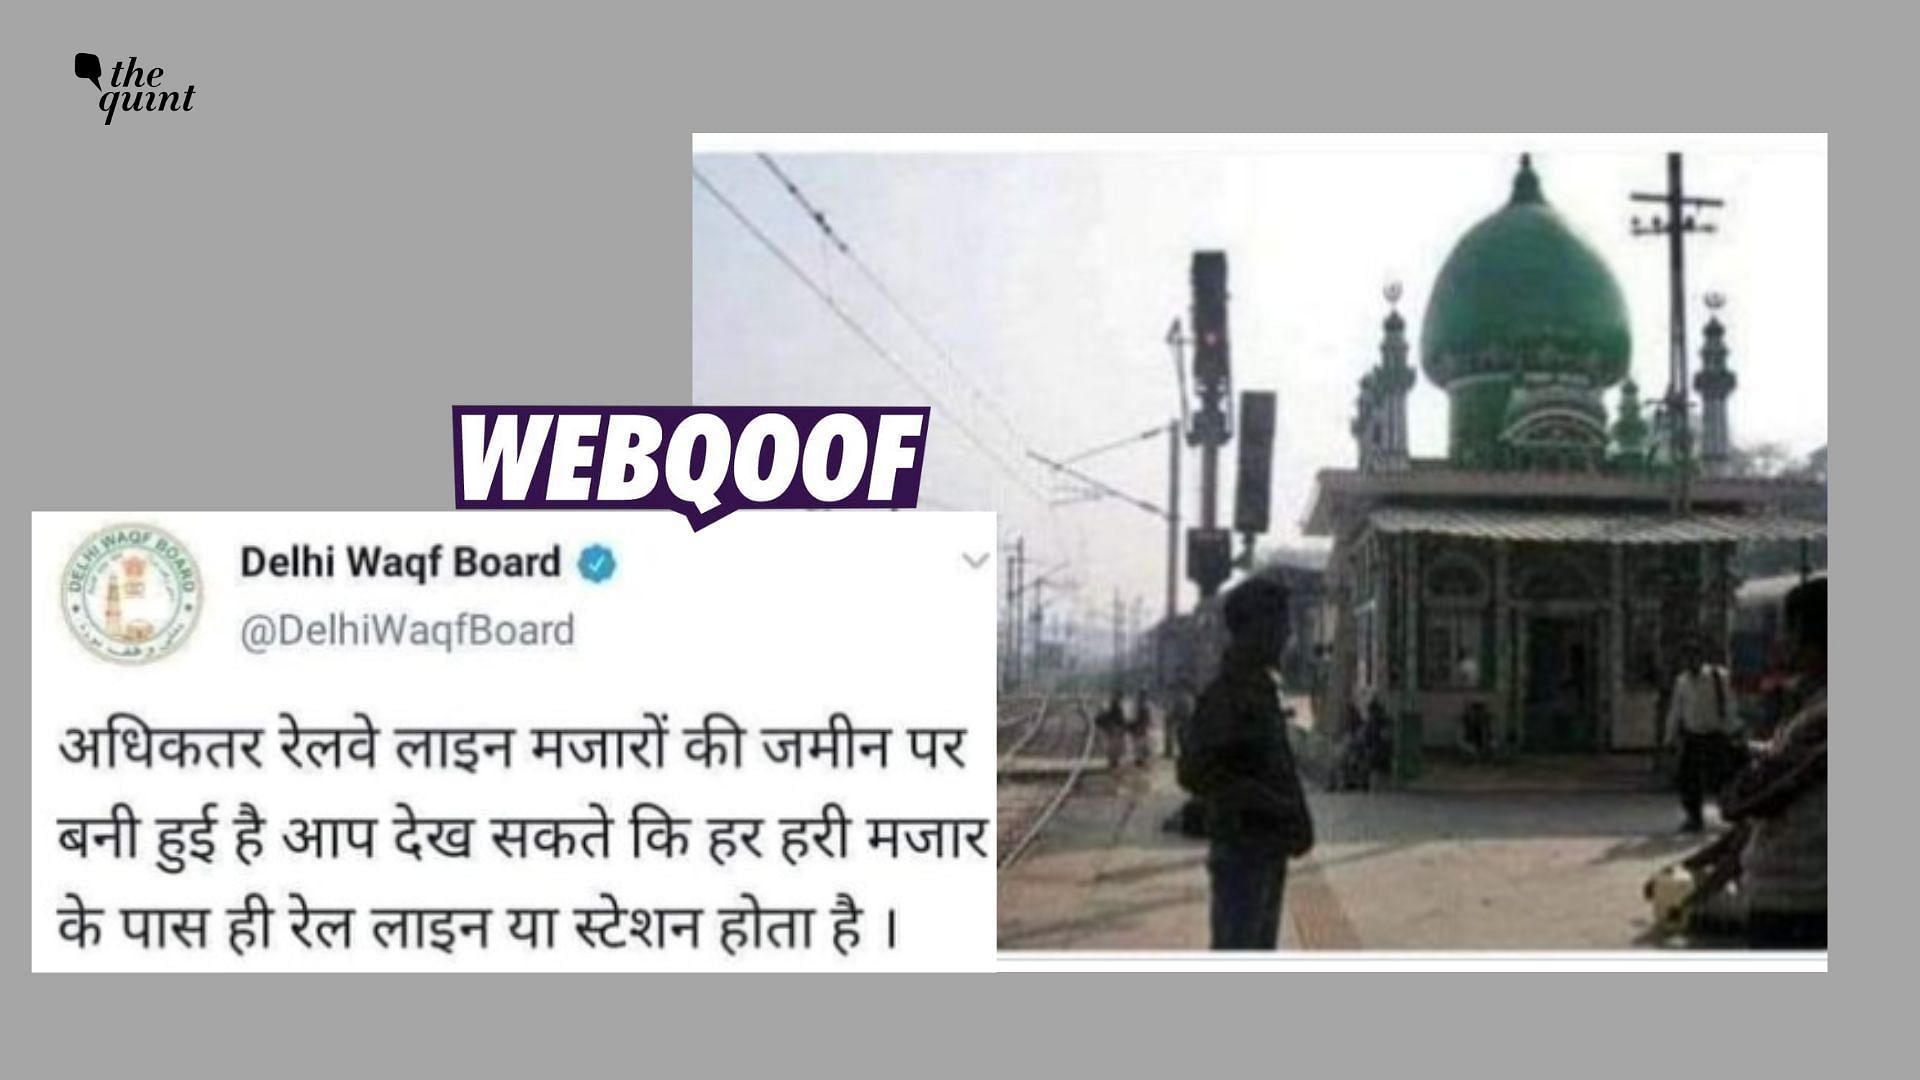 <div class="paragraphs"><p>The claim suggests that the tweet was shared by the Delhi Waqf Board.</p></div>